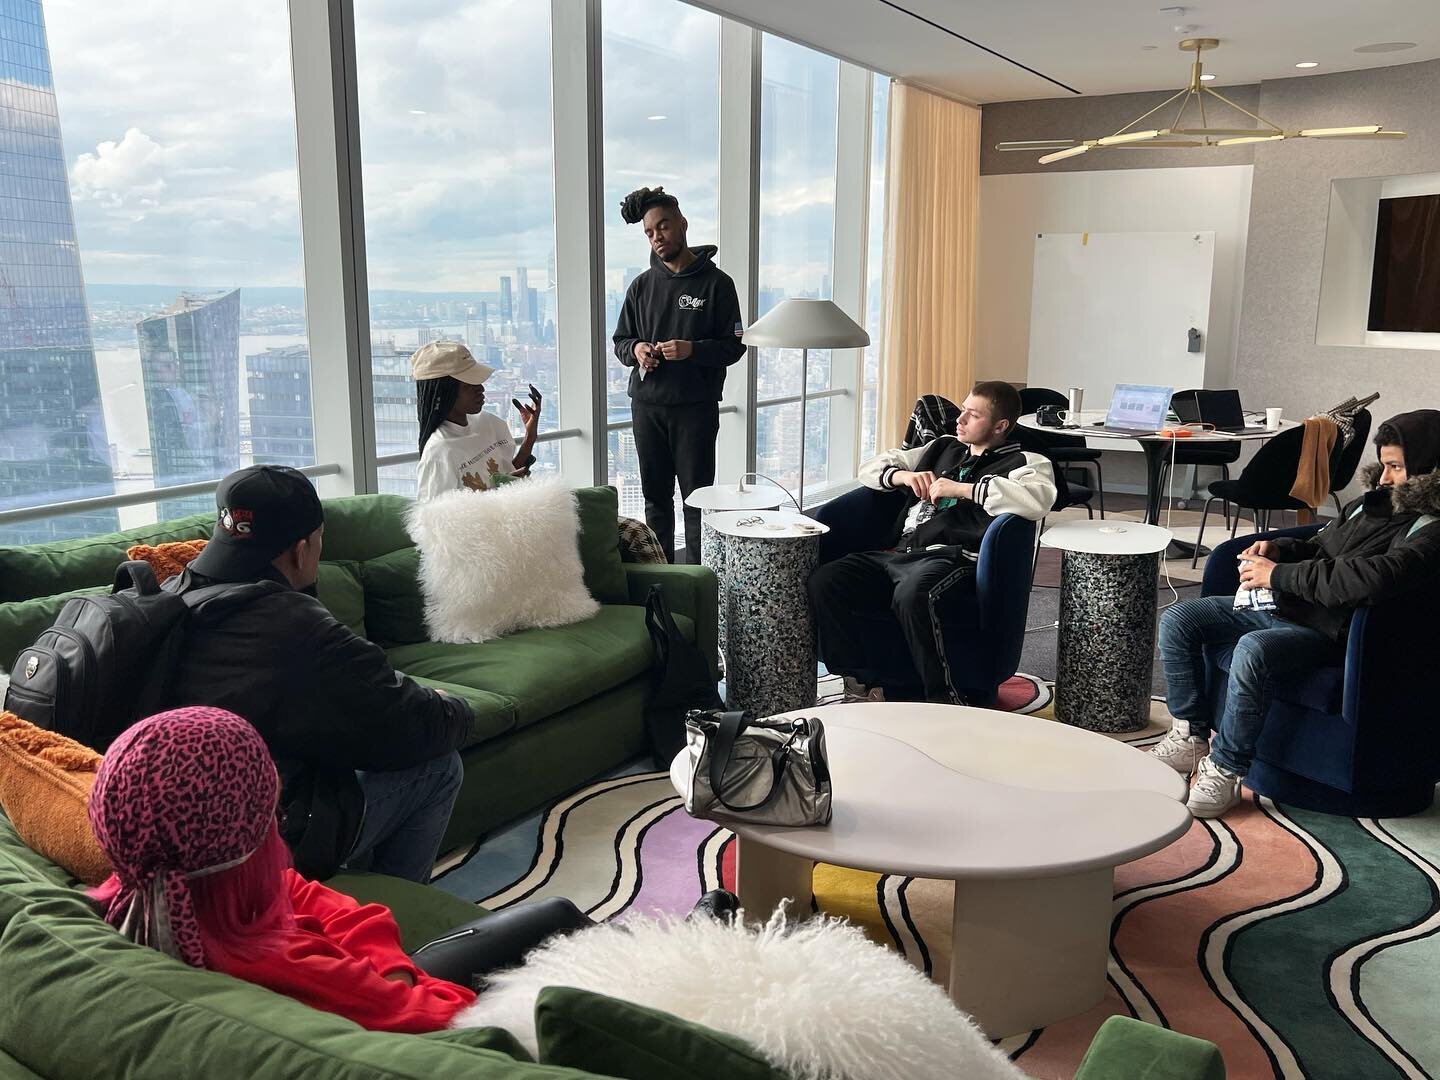 Love Uffot is a multitalented artist and Integrated Creative Producer living and working in New York City. Their work is expansive and dynamic and it was an honor to visit their space. 

Arriving at Spotify HQ we were greeted by Love and toured the i